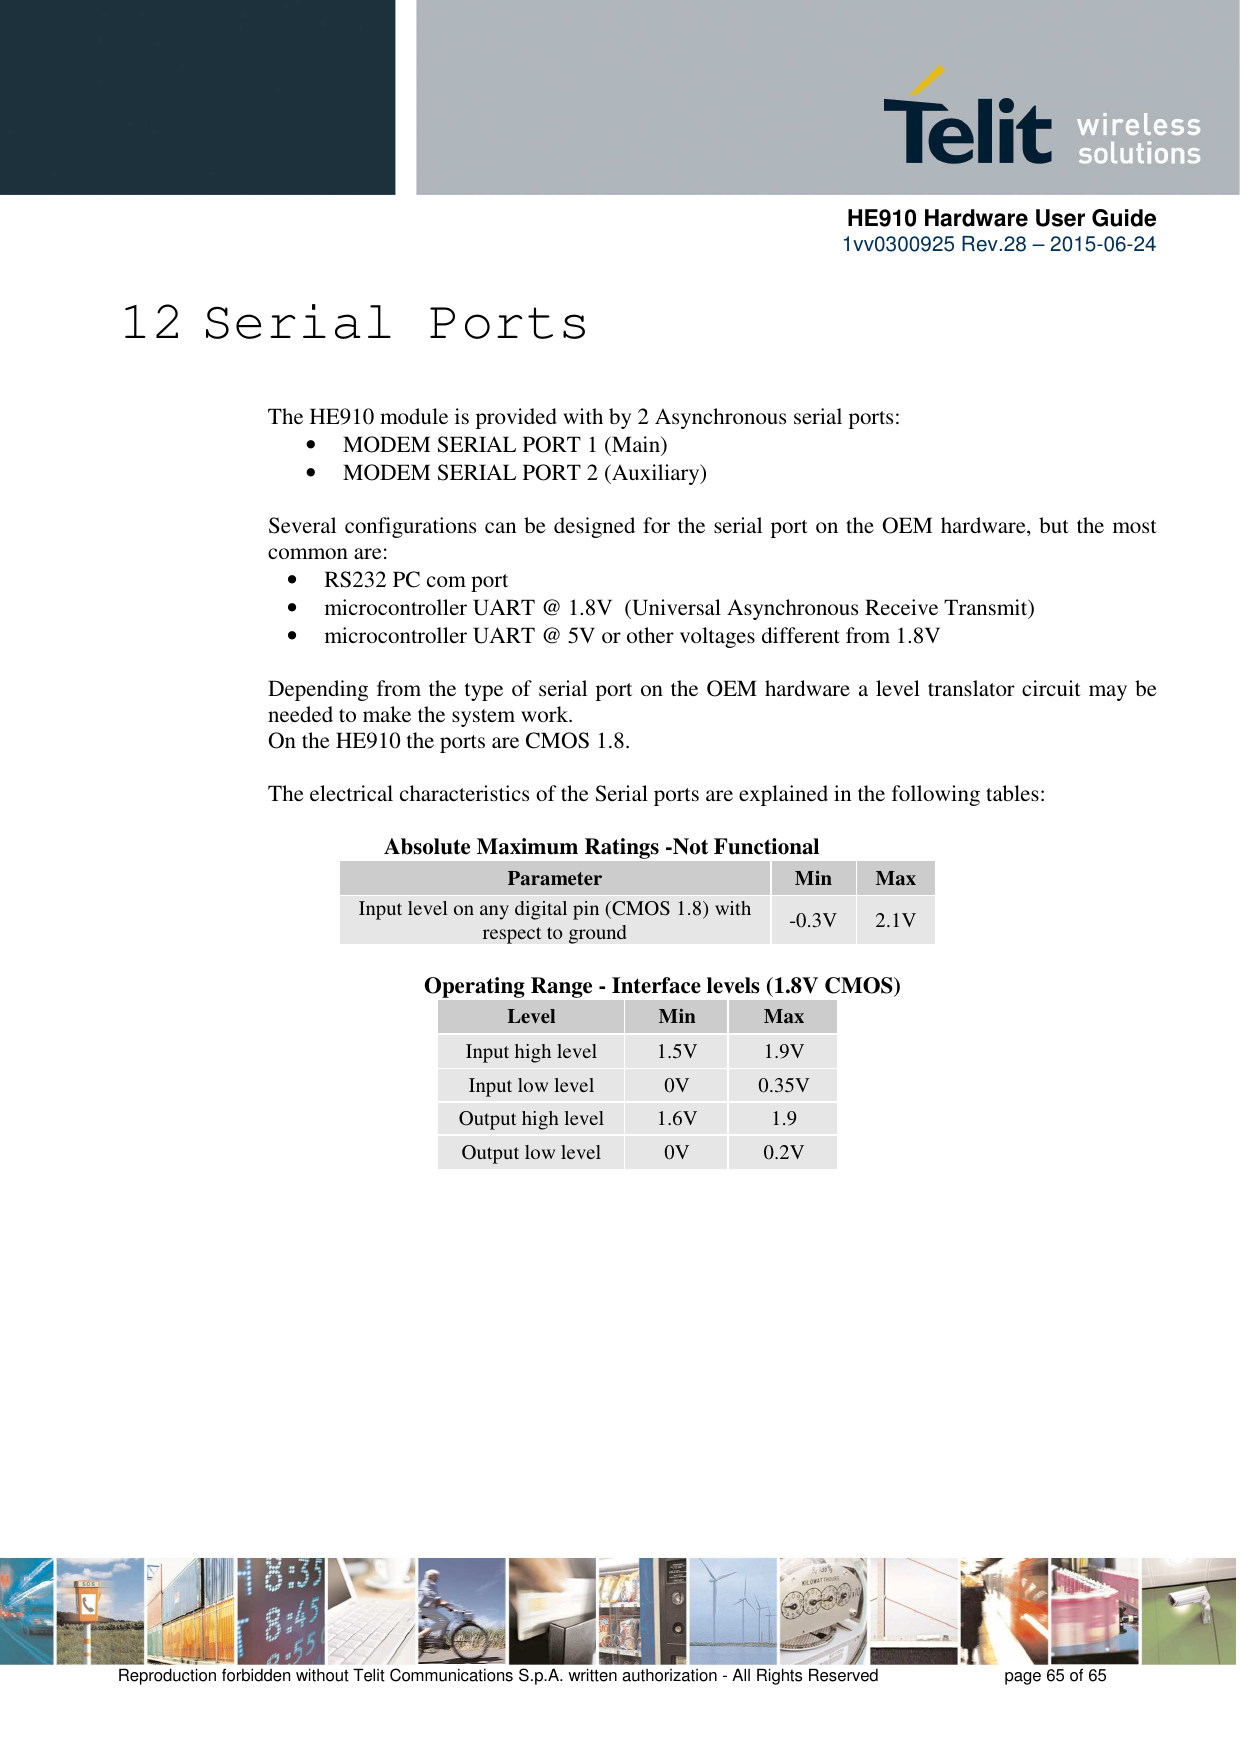      HE910 Hardware User Guide 1vv0300925 Rev.28 – 2015-06-24    Reproduction forbidden without Telit Communications S.p.A. written authorization - All Rights Reserved    page 65 of 65  12 Serial Ports The HE910 module is provided with by 2 Asynchronous serial ports: • MODEM SERIAL PORT 1 (Main) • MODEM SERIAL PORT 2 (Auxiliary)  Several configurations can be designed for the serial port on the OEM hardware, but the most common are: • RS232 PC com port • microcontroller UART @ 1.8V  (Universal Asynchronous Receive Transmit)  • microcontroller UART @ 5V or other voltages different from 1.8V   Depending from the type of serial port on the OEM hardware a level translator circuit may be needed to make the system work.  On the HE910 the ports are CMOS 1.8.  The electrical characteristics of the Serial ports are explained in the following tables:      Absolute Maximum Ratings -Not Functional Parameter  Min  Max Input level on any digital pin (CMOS 1.8) with respect to ground  -0.3V  2.1V              Operating Range - Interface levels (1.8V CMOS) Level  Min  Max Input high level  1.5V  1.9V Input low level  0V  0.35V Output high level  1.6V  1.9 Output low level  0V  0.2V      